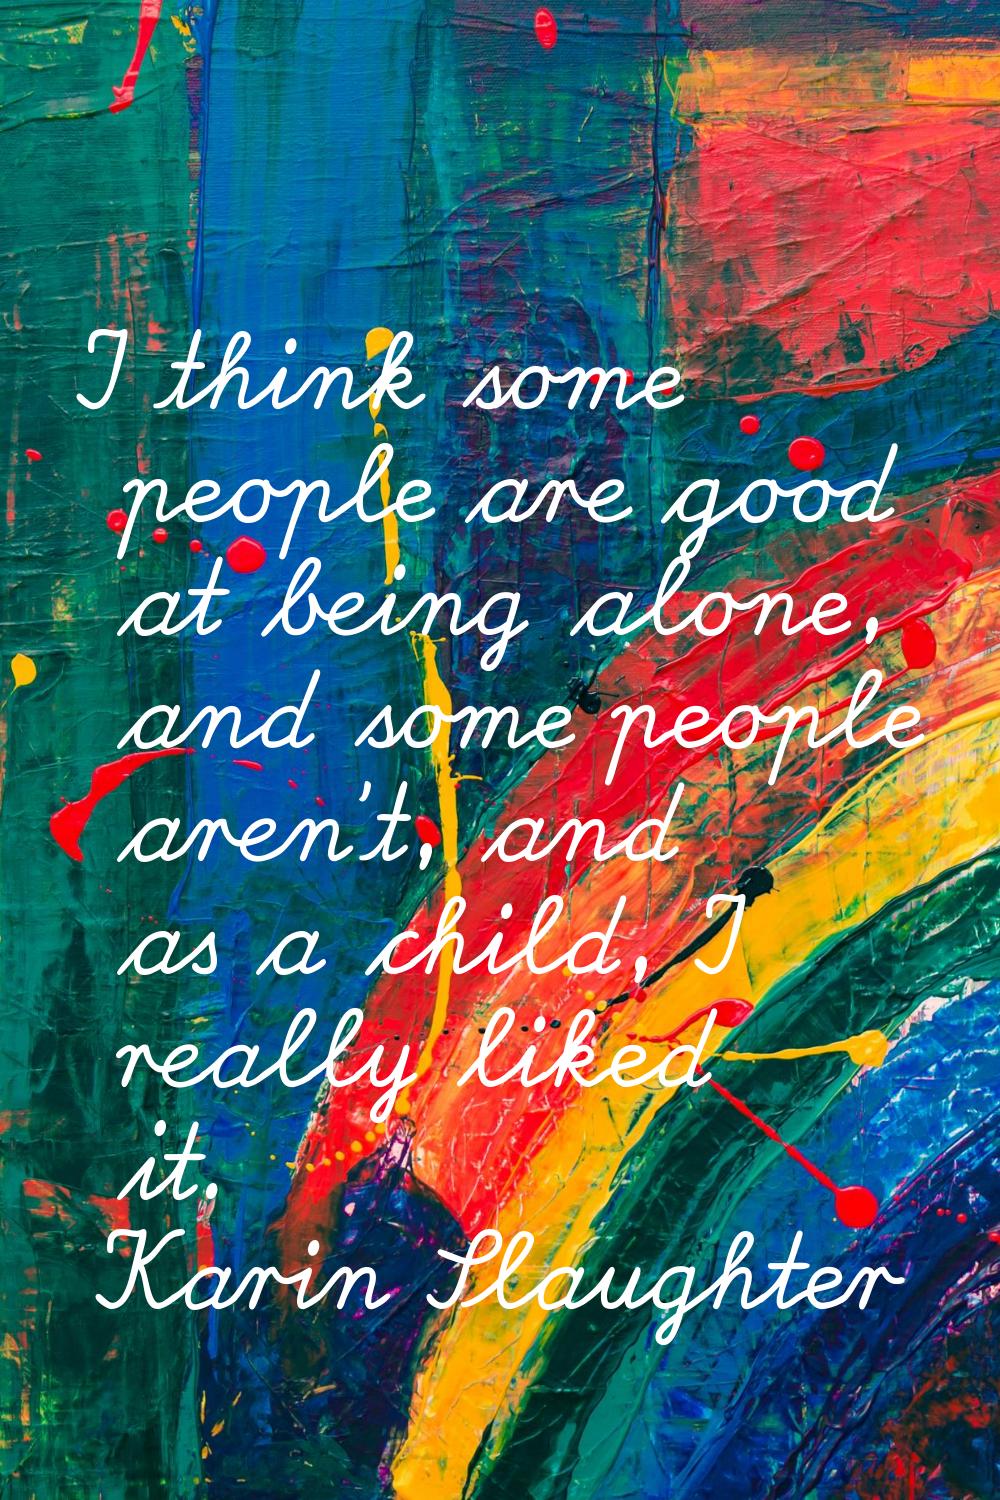 I think some people are good at being alone, and some people aren't, and as a child, I really liked